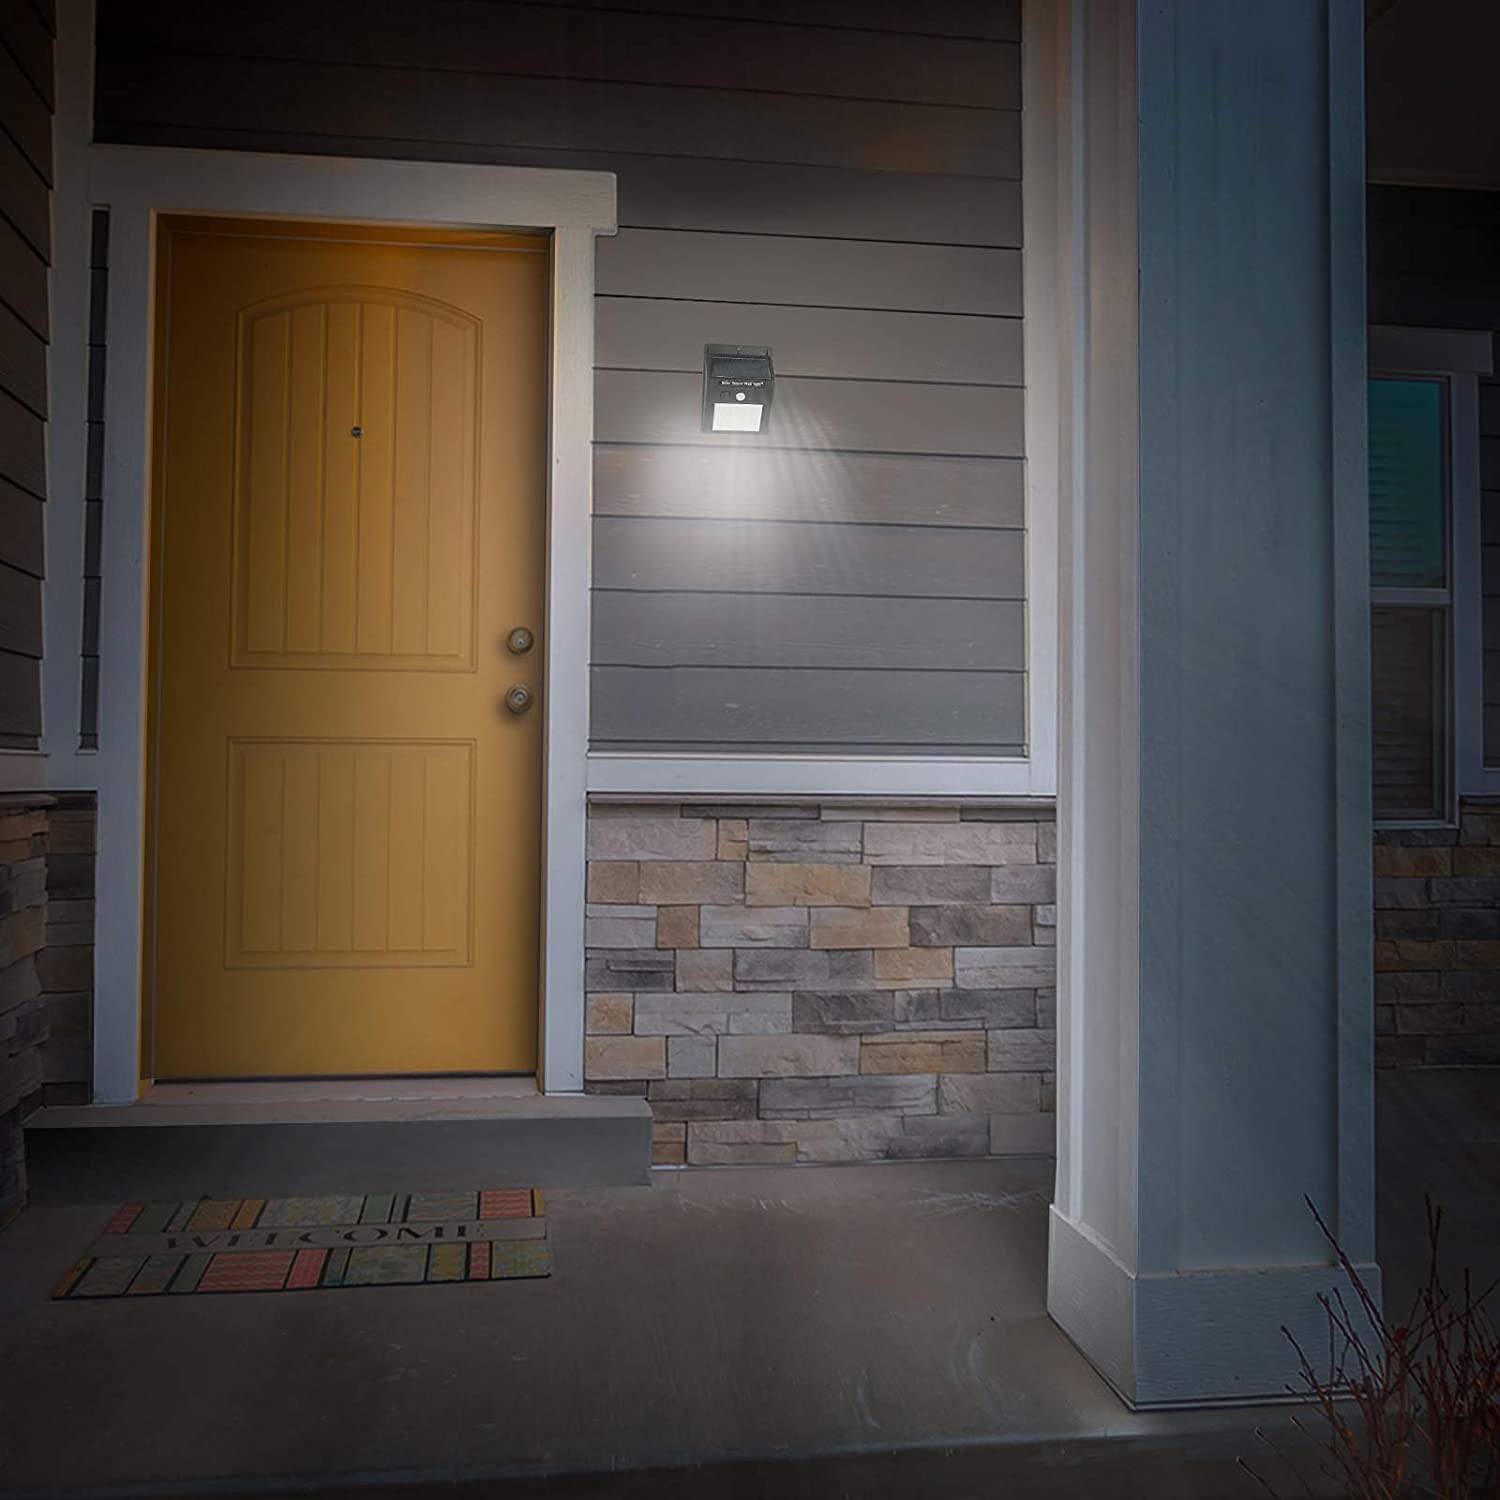 LED Bright Outdoor Security Lights with Motion Sensor Solar